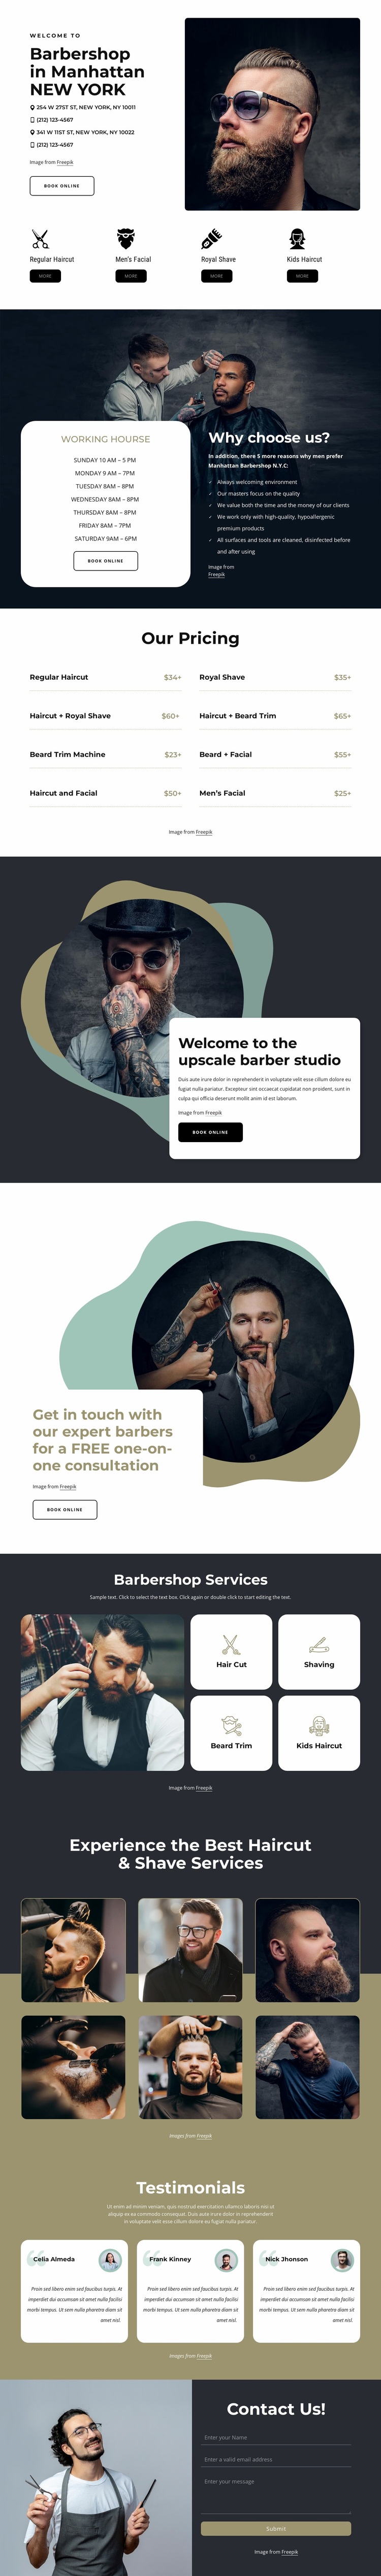 Hight quality grooming services Website Design